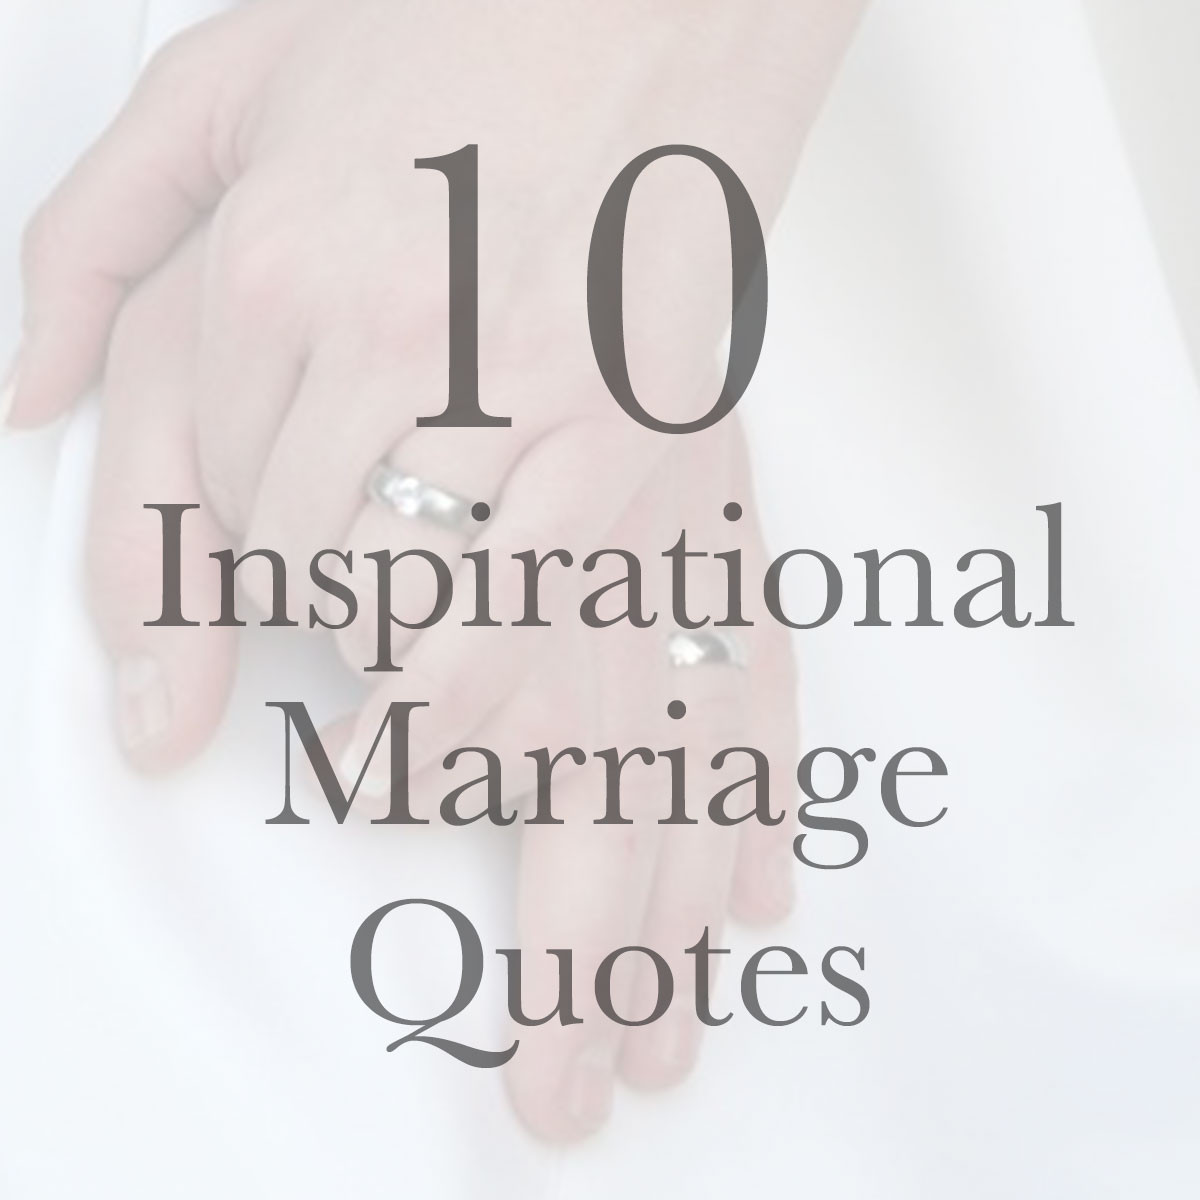 Spiritual Marriage Quotes
 marriage quotes